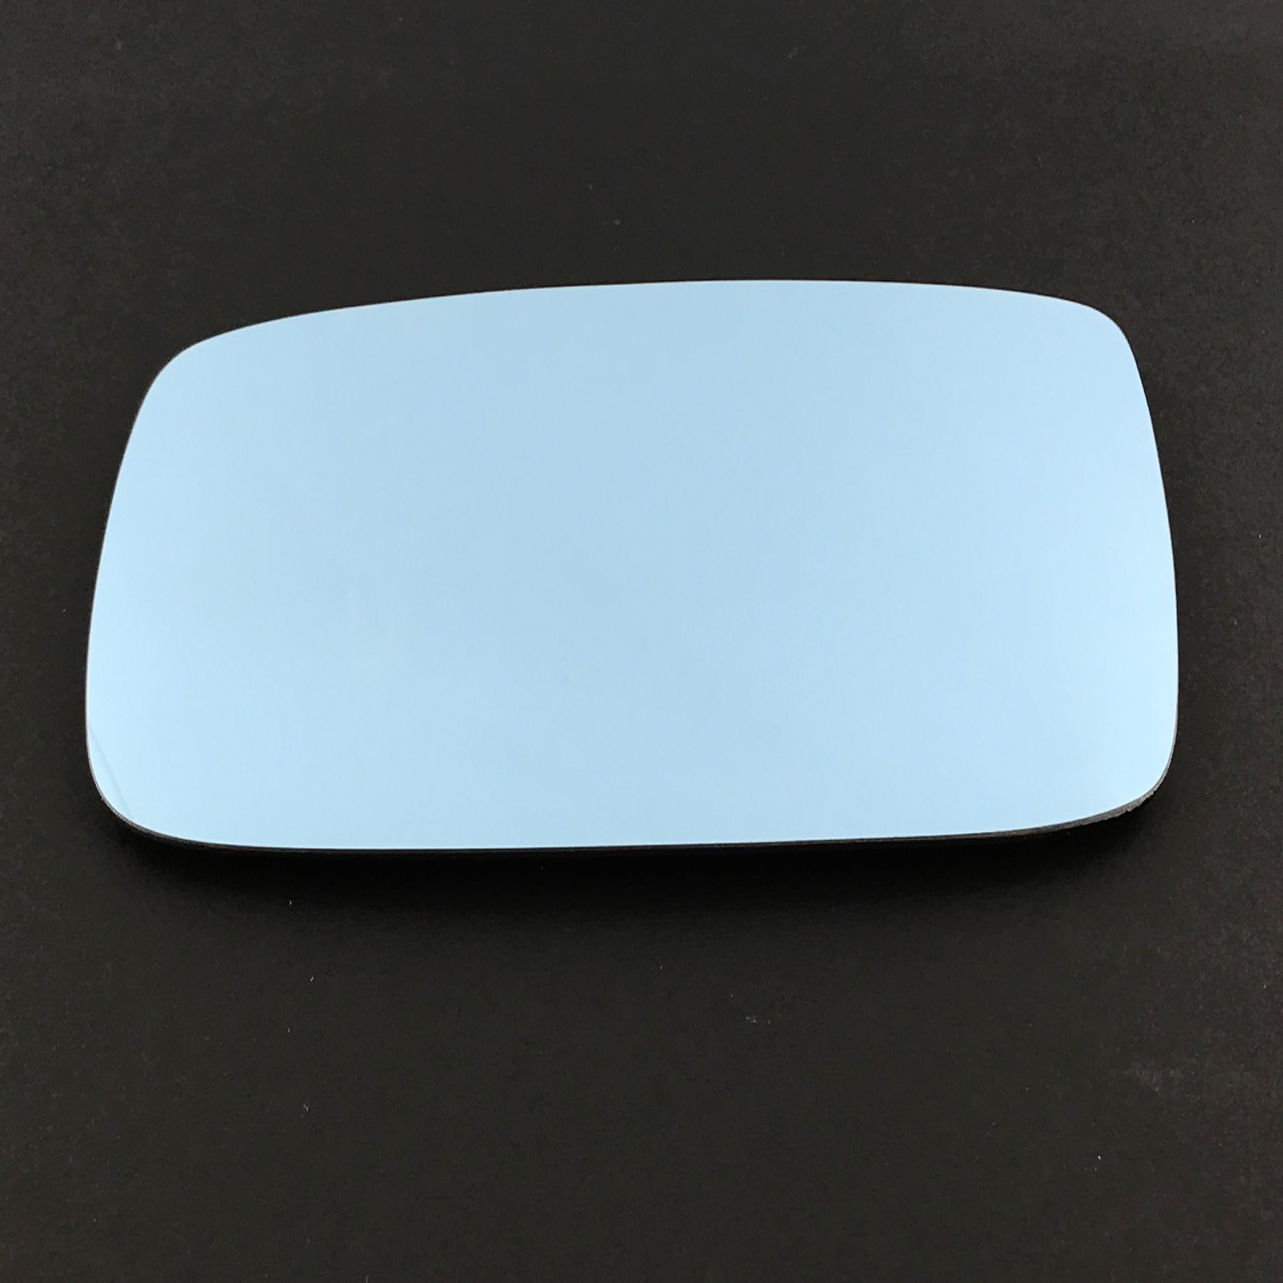 Volvo 940 Wing Mirror Glass RIGHT HAND ( UK Driver Side ) 1990 to 1997 – Convex Wing Mirror ( Blue Tinted )